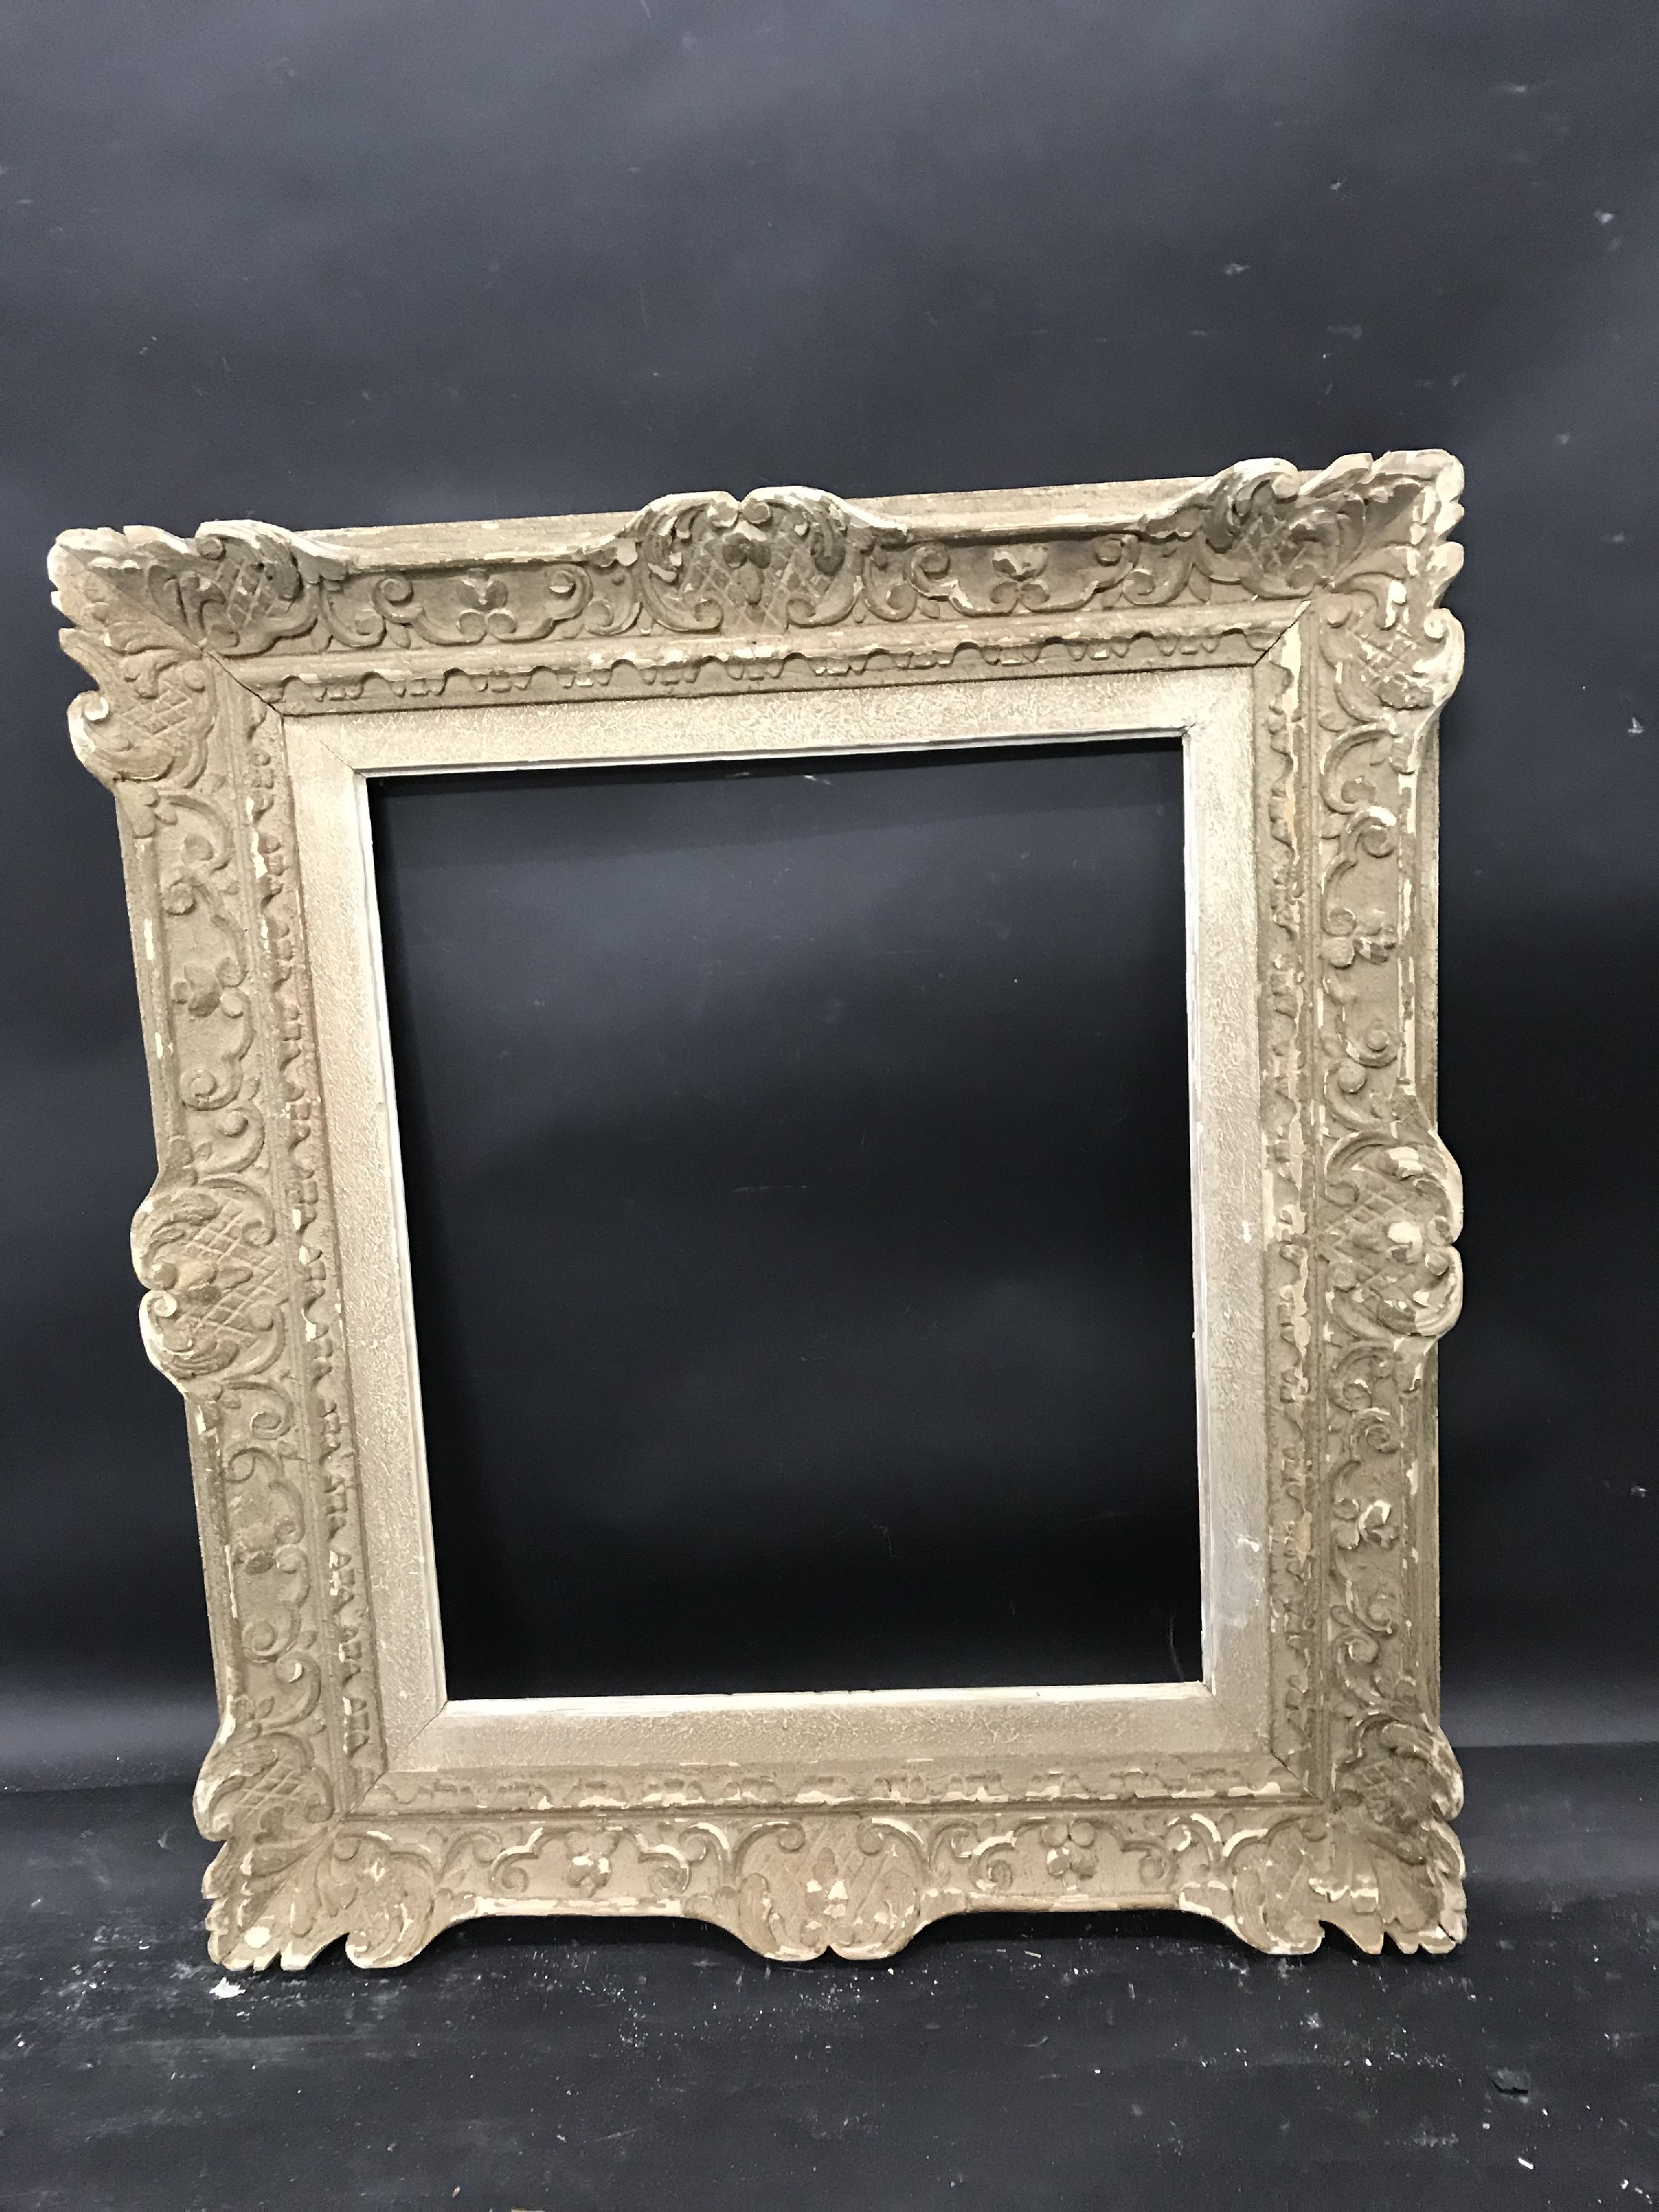 20th Century English School. A Carved Wood Painted Frame, 16" x 15" (rebate). - Image 2 of 3